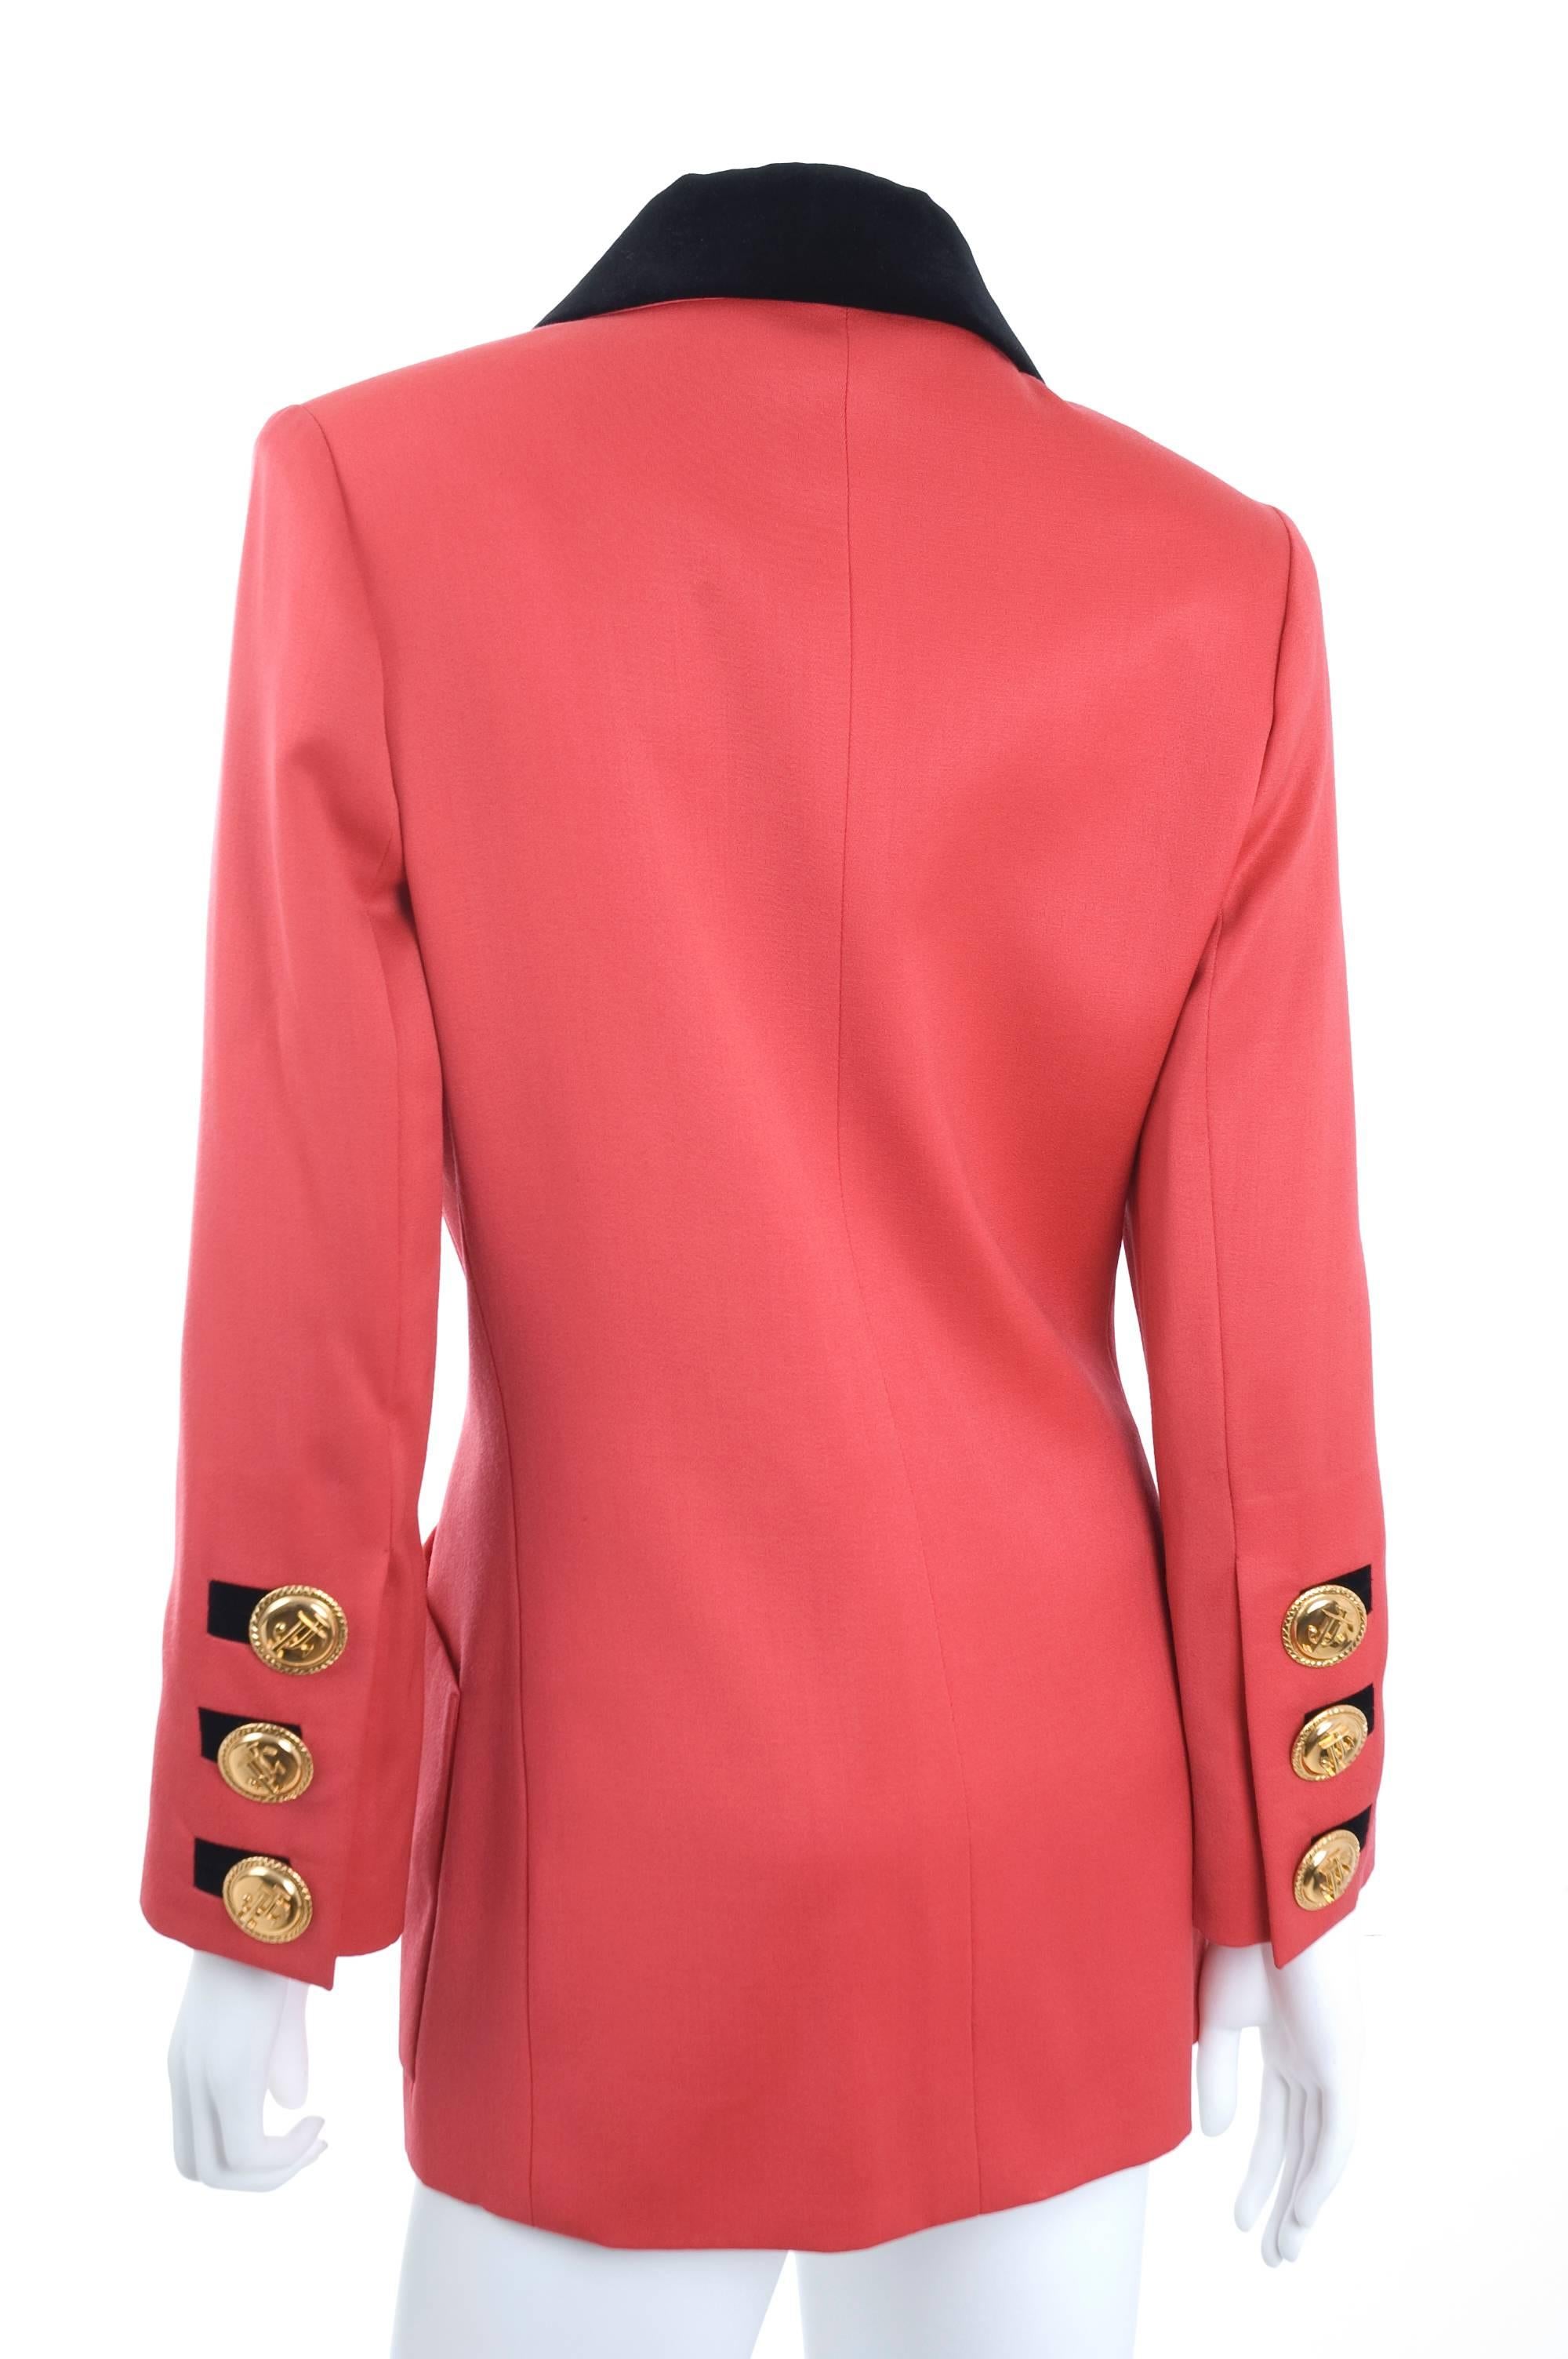 Jaques Fath Jacket in Lipstick Red and Black Velvet For Sale 3